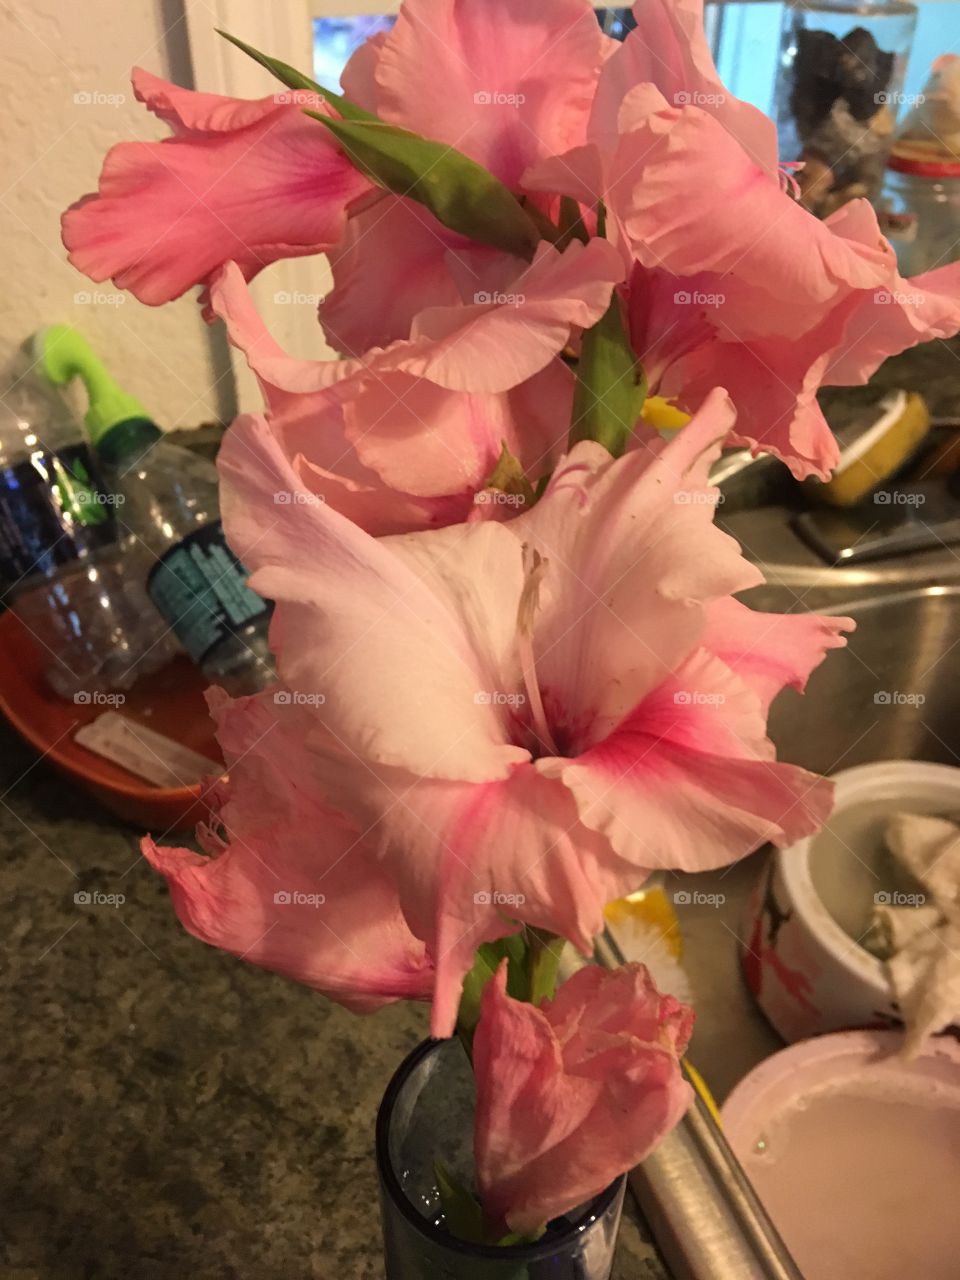 Some of my Glads are blooming happily even though this one broke so it’s now in a vase